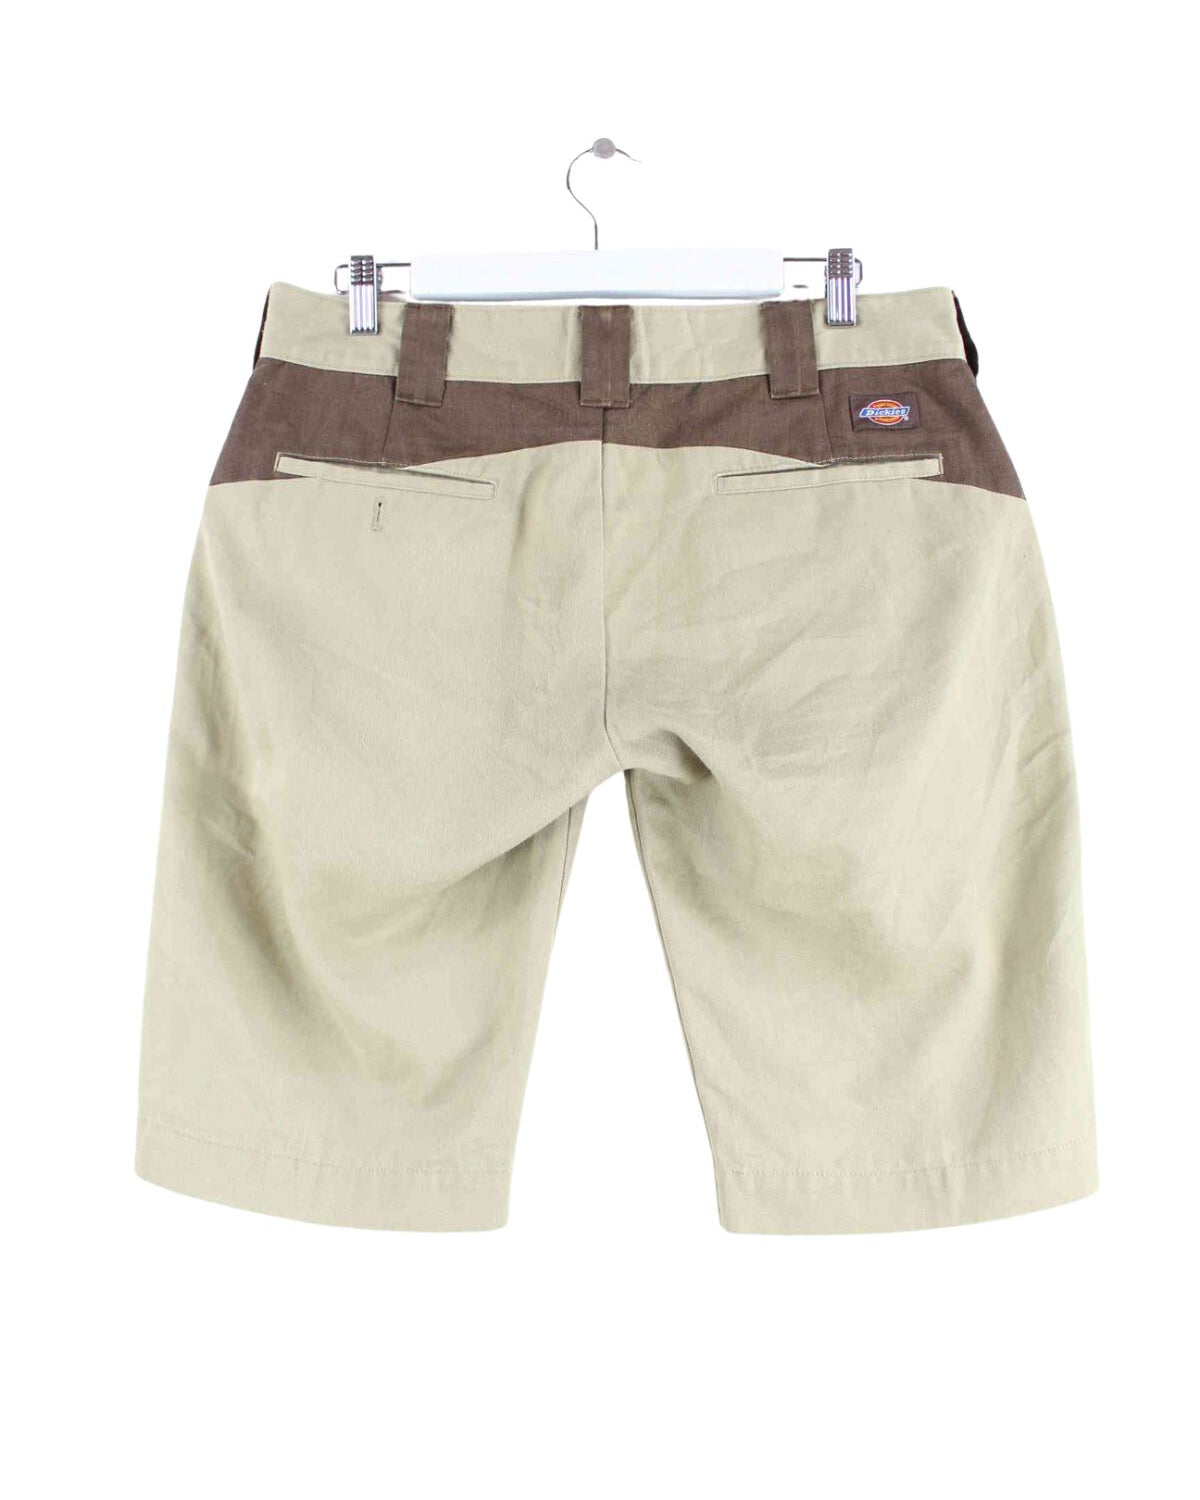 Dickies Chino Shorts Beige W32 (back image)